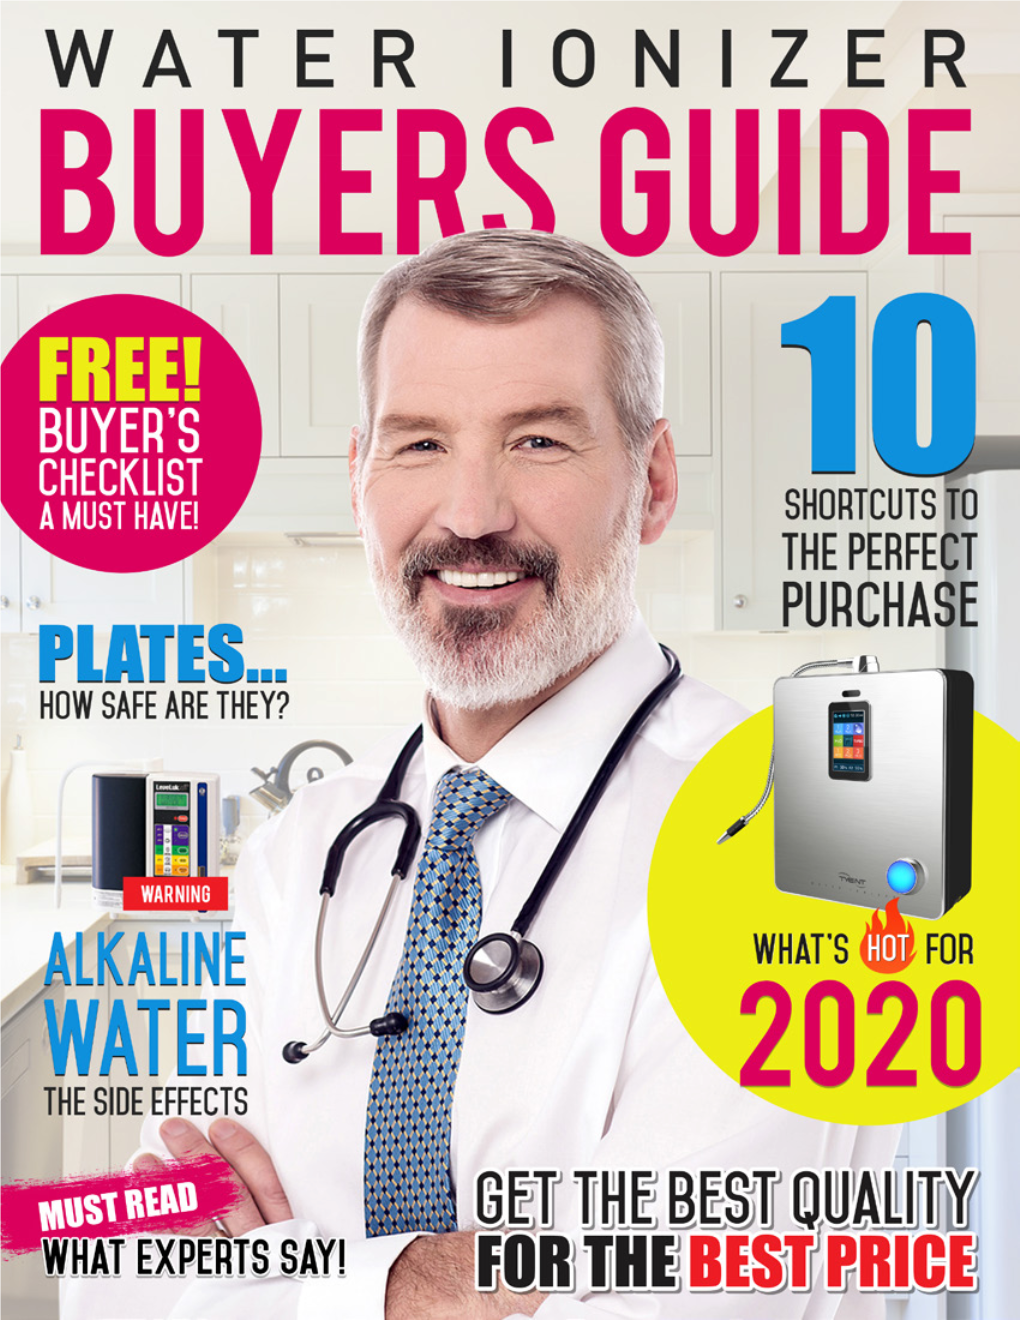 Online Ionized Water Buyer's Guide